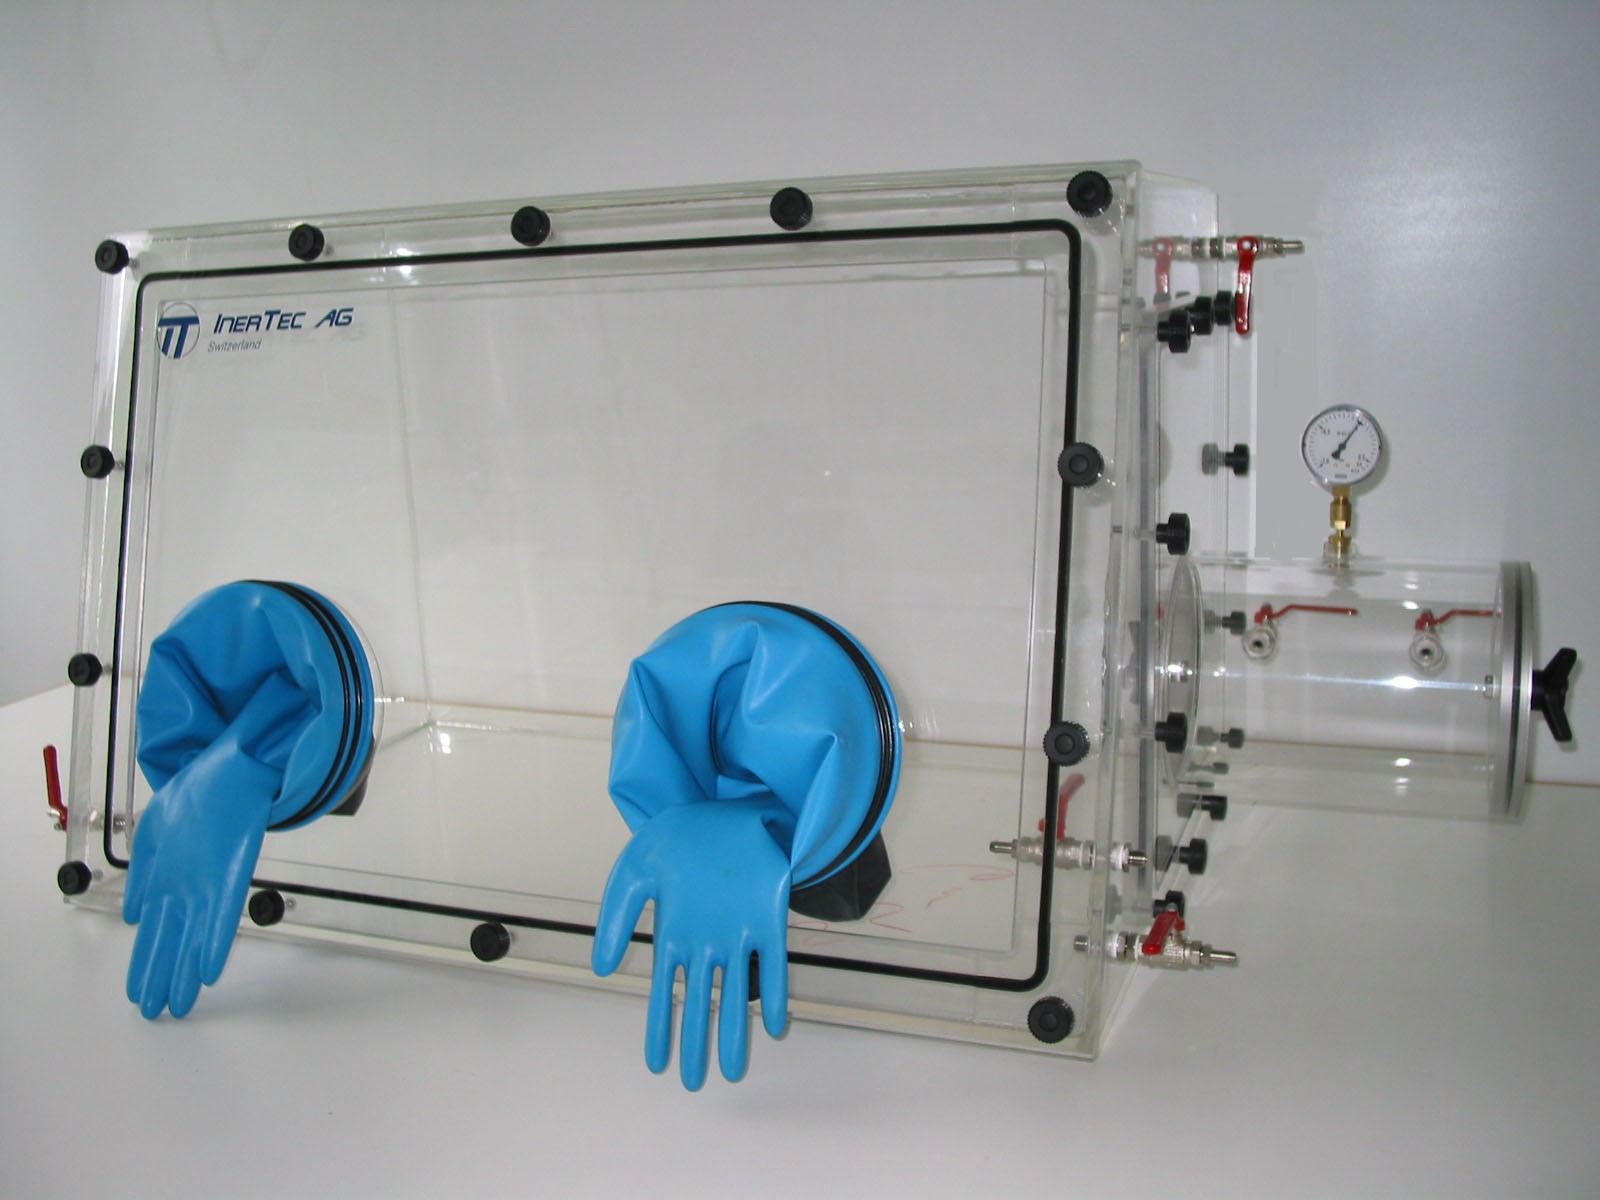 Glovebox made of acrylic&gt; Gas filling: automatic flushing with pressure control, front design: removable, side design: round vacuum lock, control: humidity regulator with oxygen display